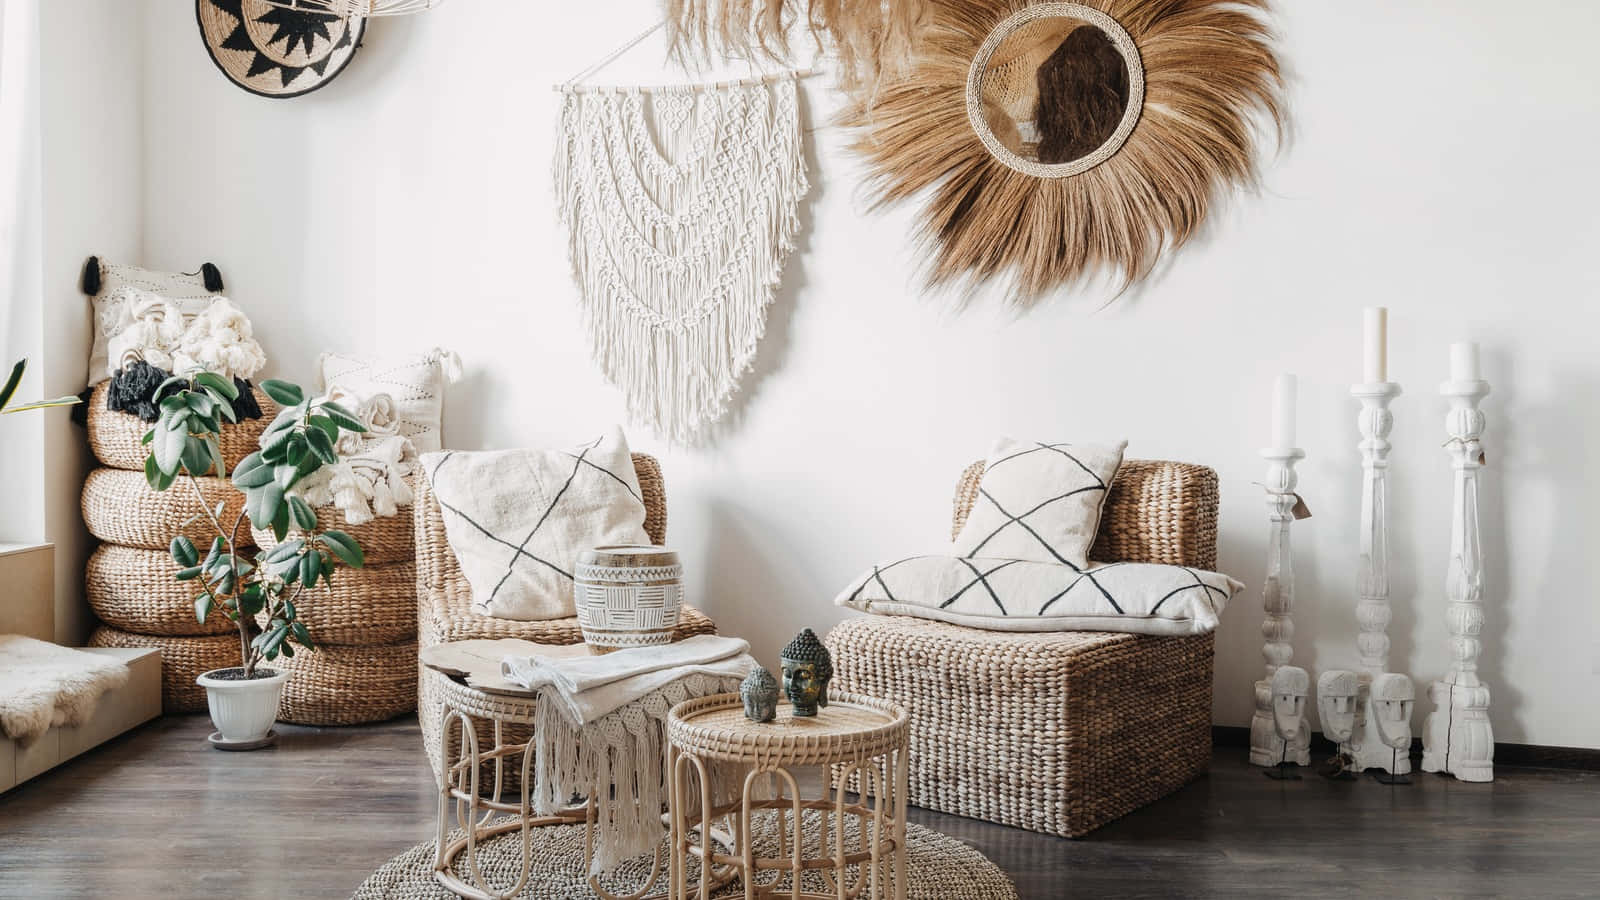 A Room With A Wicker Chair, A Rug And A Wall Hanging